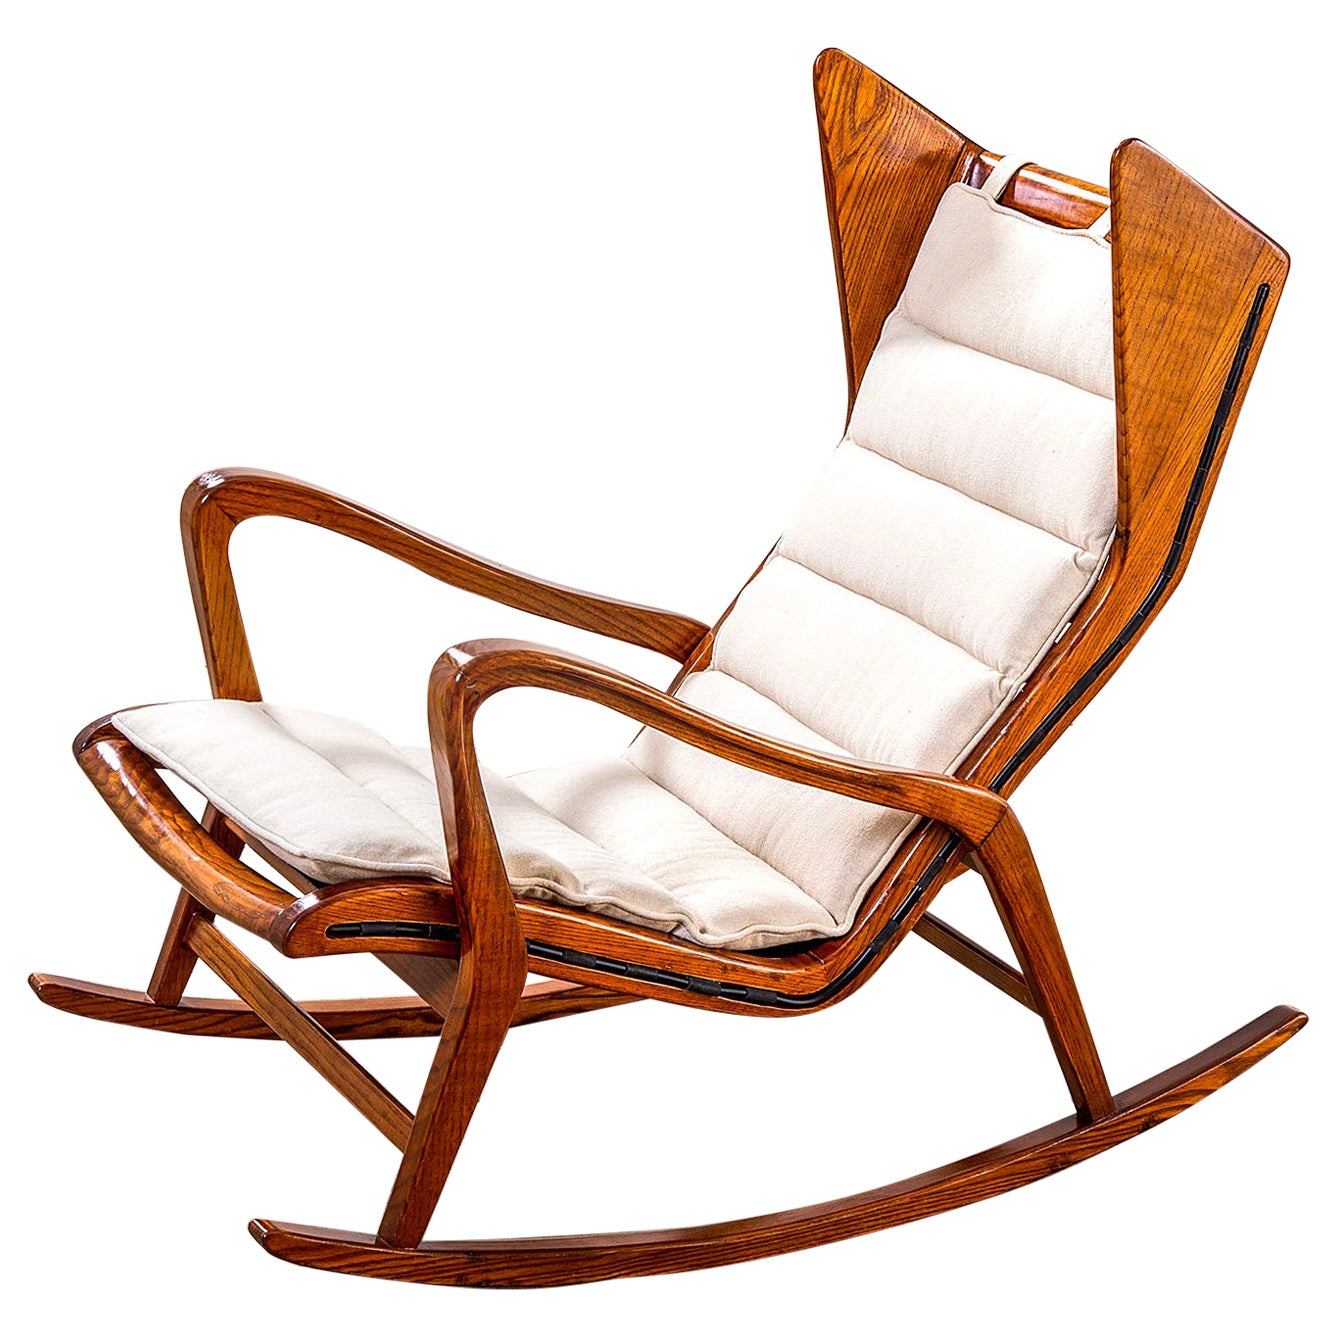 20th Century Cassina Rocking Chair mod. 572 in Wood and Fabric, 1950s For Sale